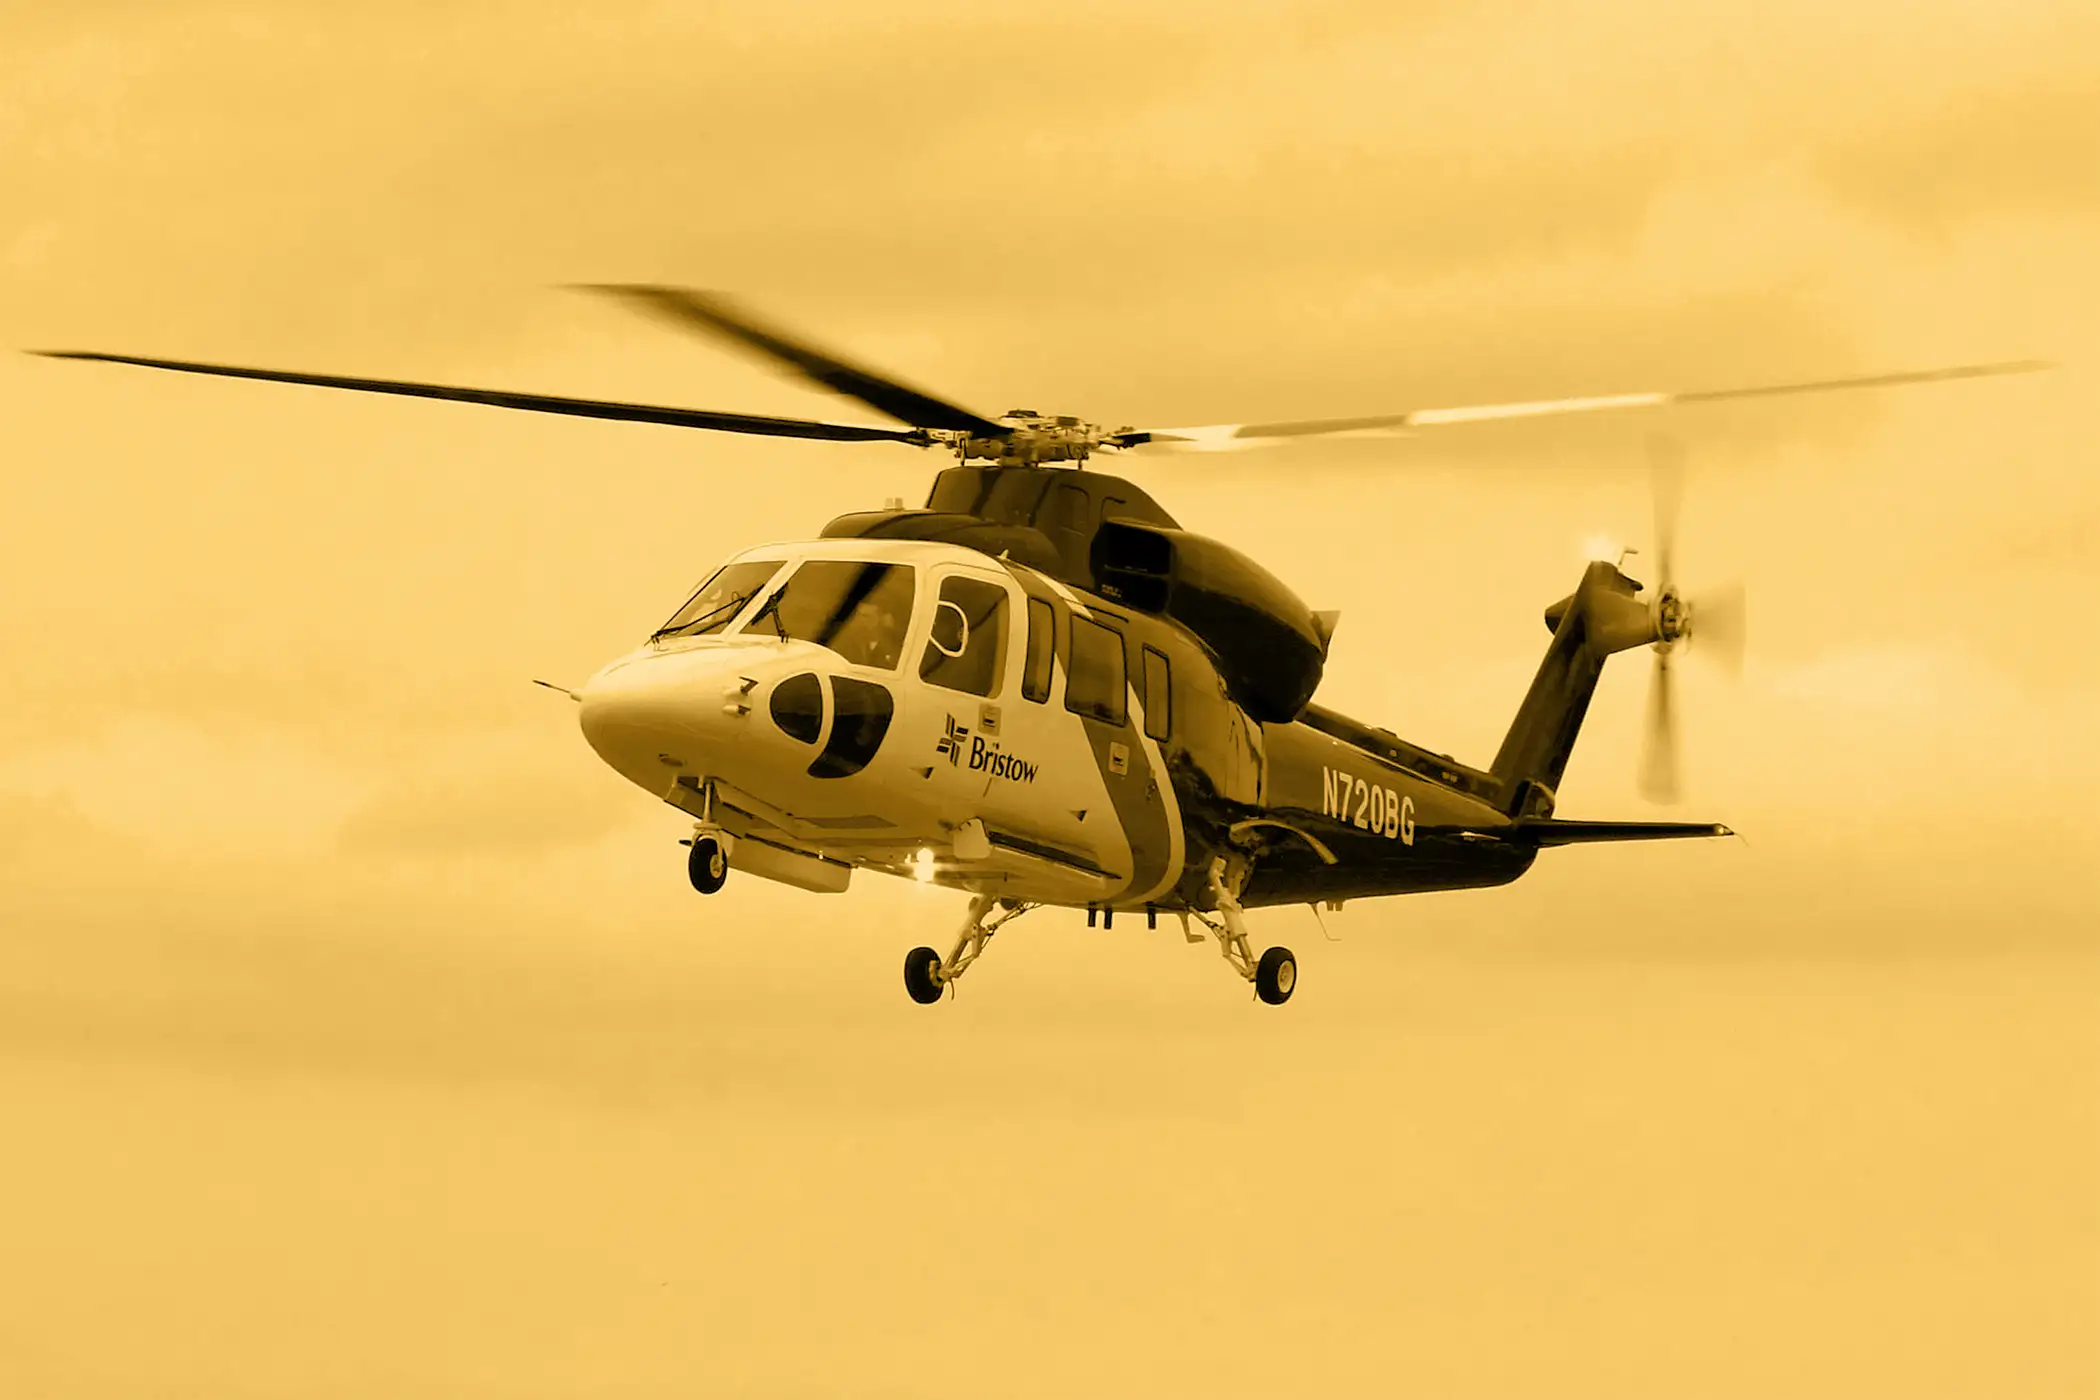 In December 2013, Sikorsky Aircraft Corp. delivered its first fully configured S-76D(TM) helicopter, the latest in the long and highly successful Sikorsky S-76(TM) commercial aircraft family, to the Bristow Group Inc.